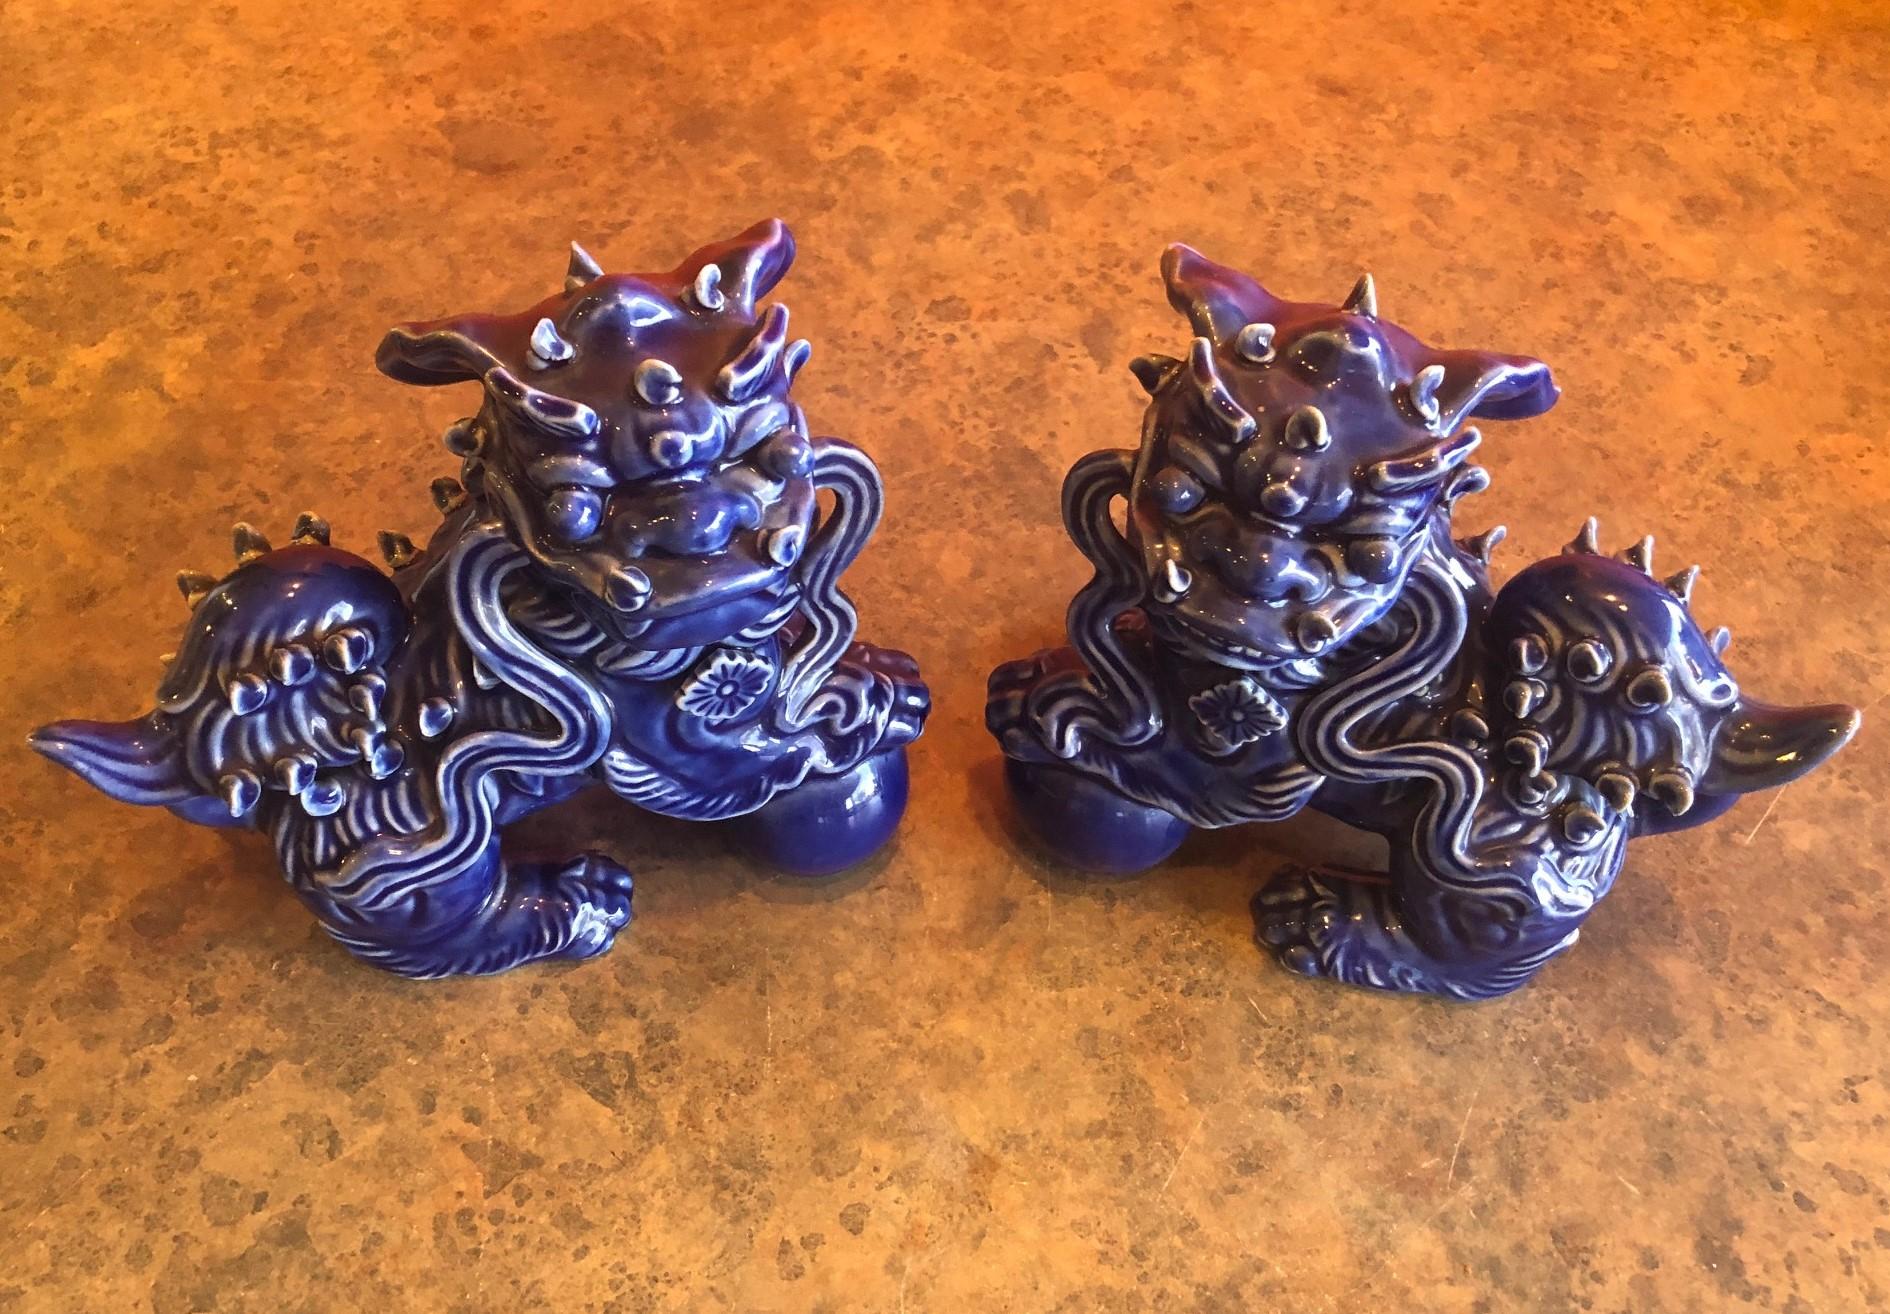 A very nice pair of midcentury Chinese ceramic foo dogs in a dark blue glaze, circa 1960s. Excellent condition and patina; makes a great pair of book ends or a fun decor item in any room!